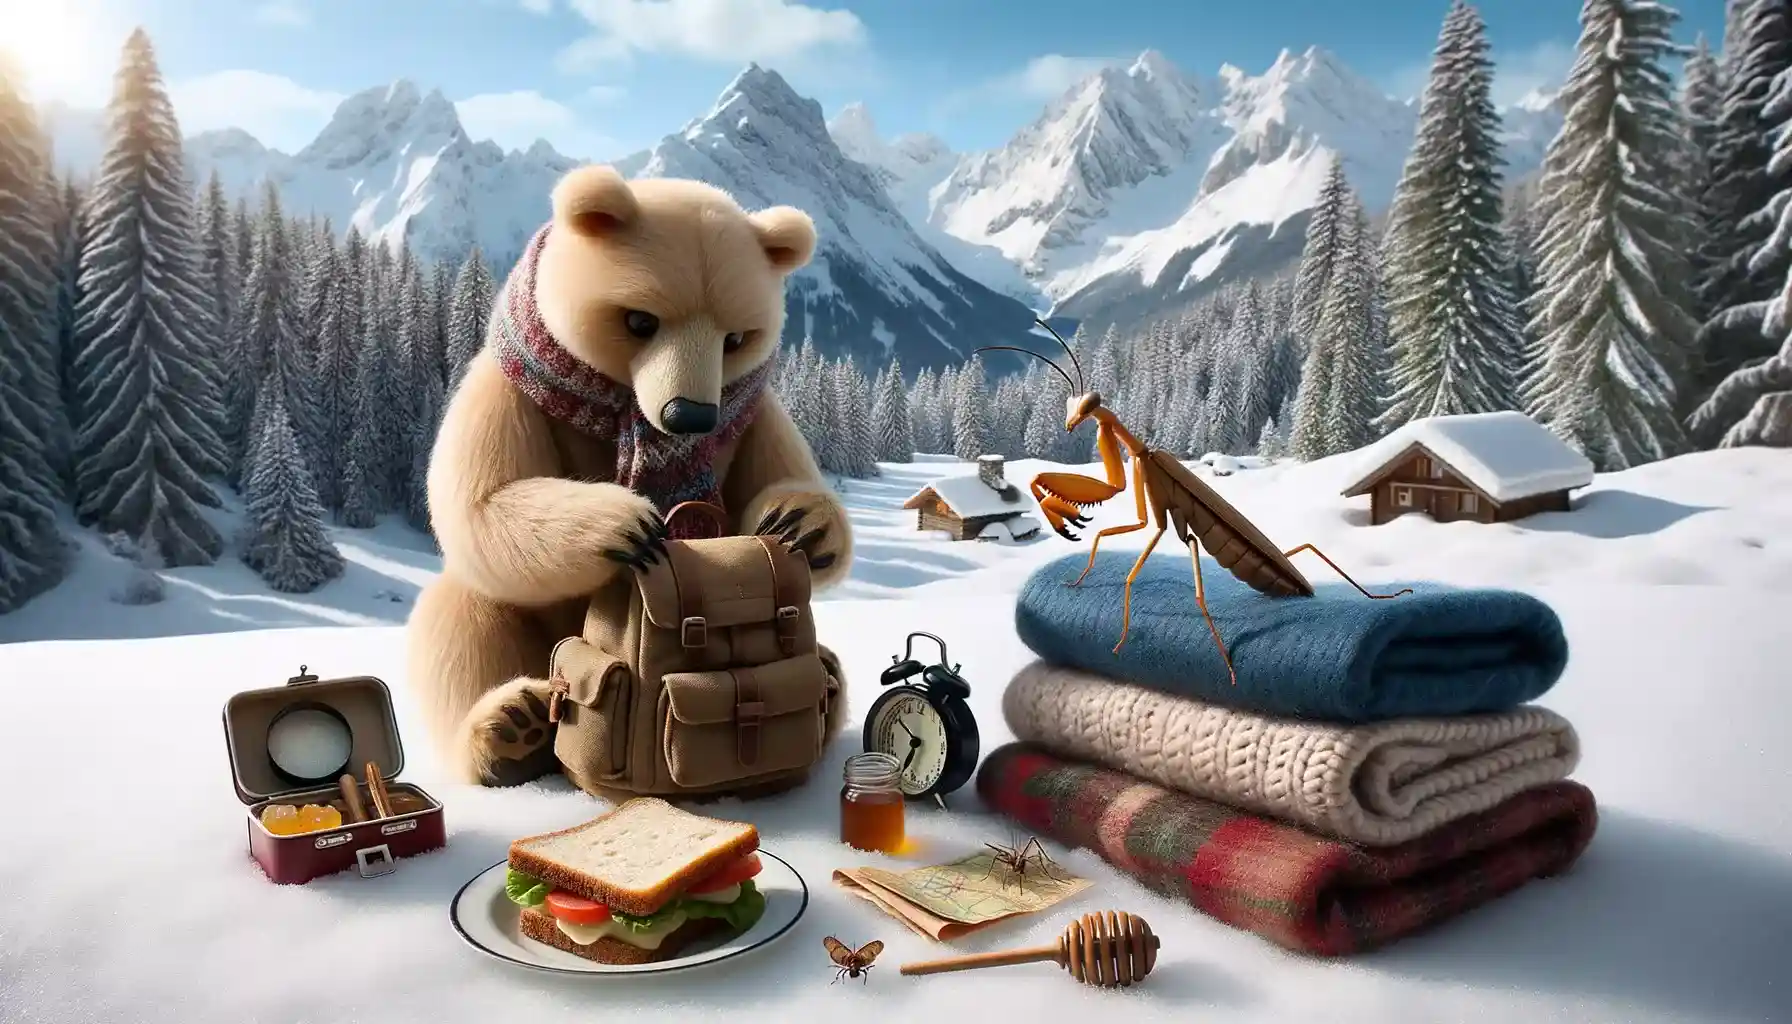 Bruno the bear, wearing a winter scarf, is seen packing his big backpack